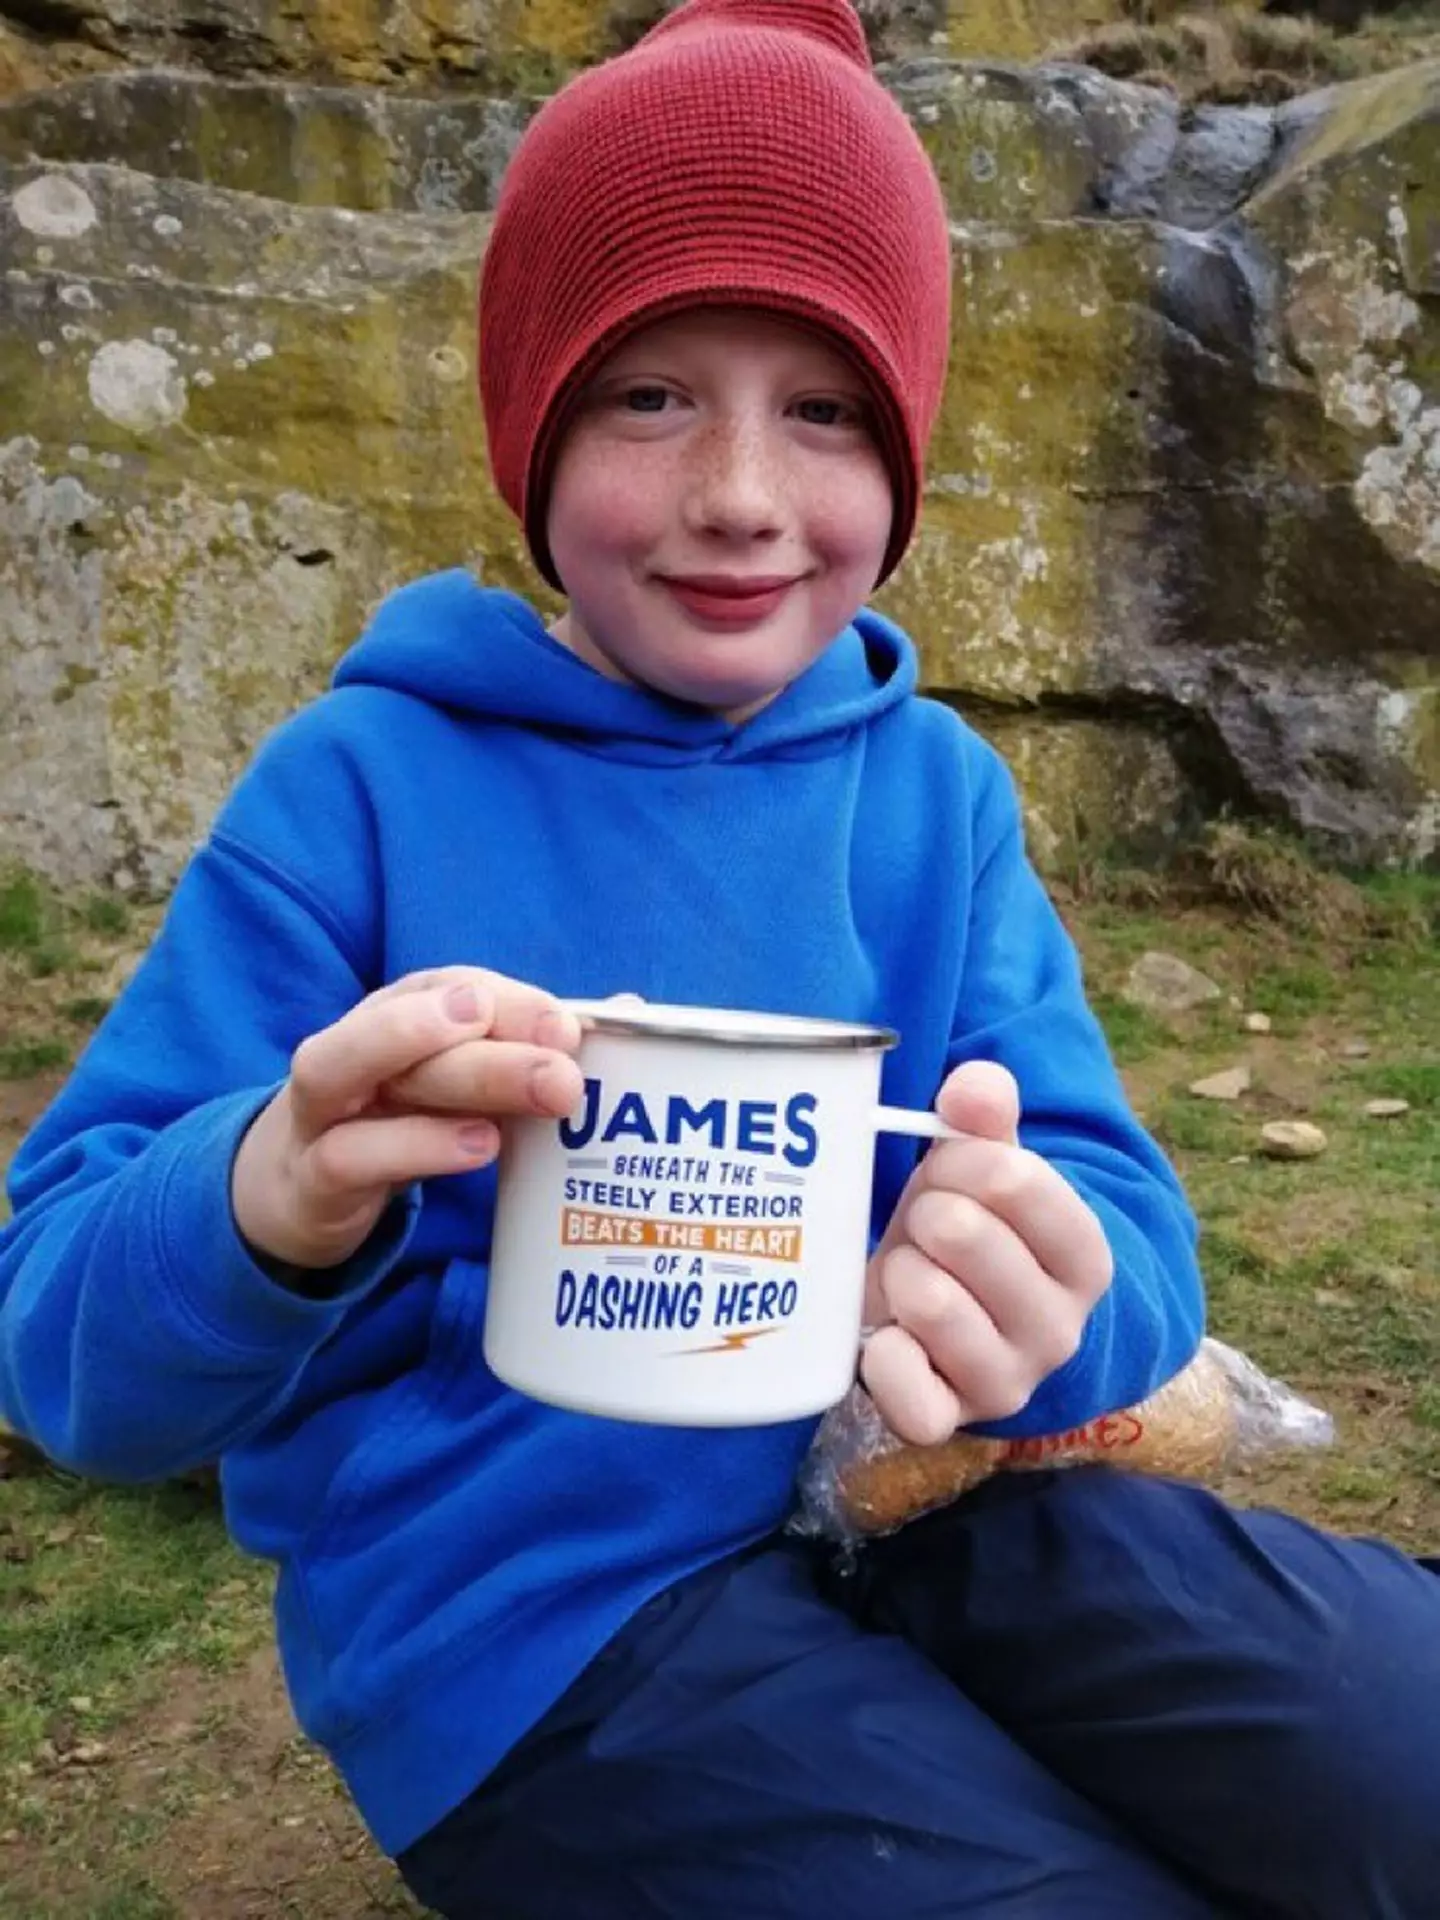 Lewis Capaldi's Glasto set clearly had an impact on 11-year-old James Craven.